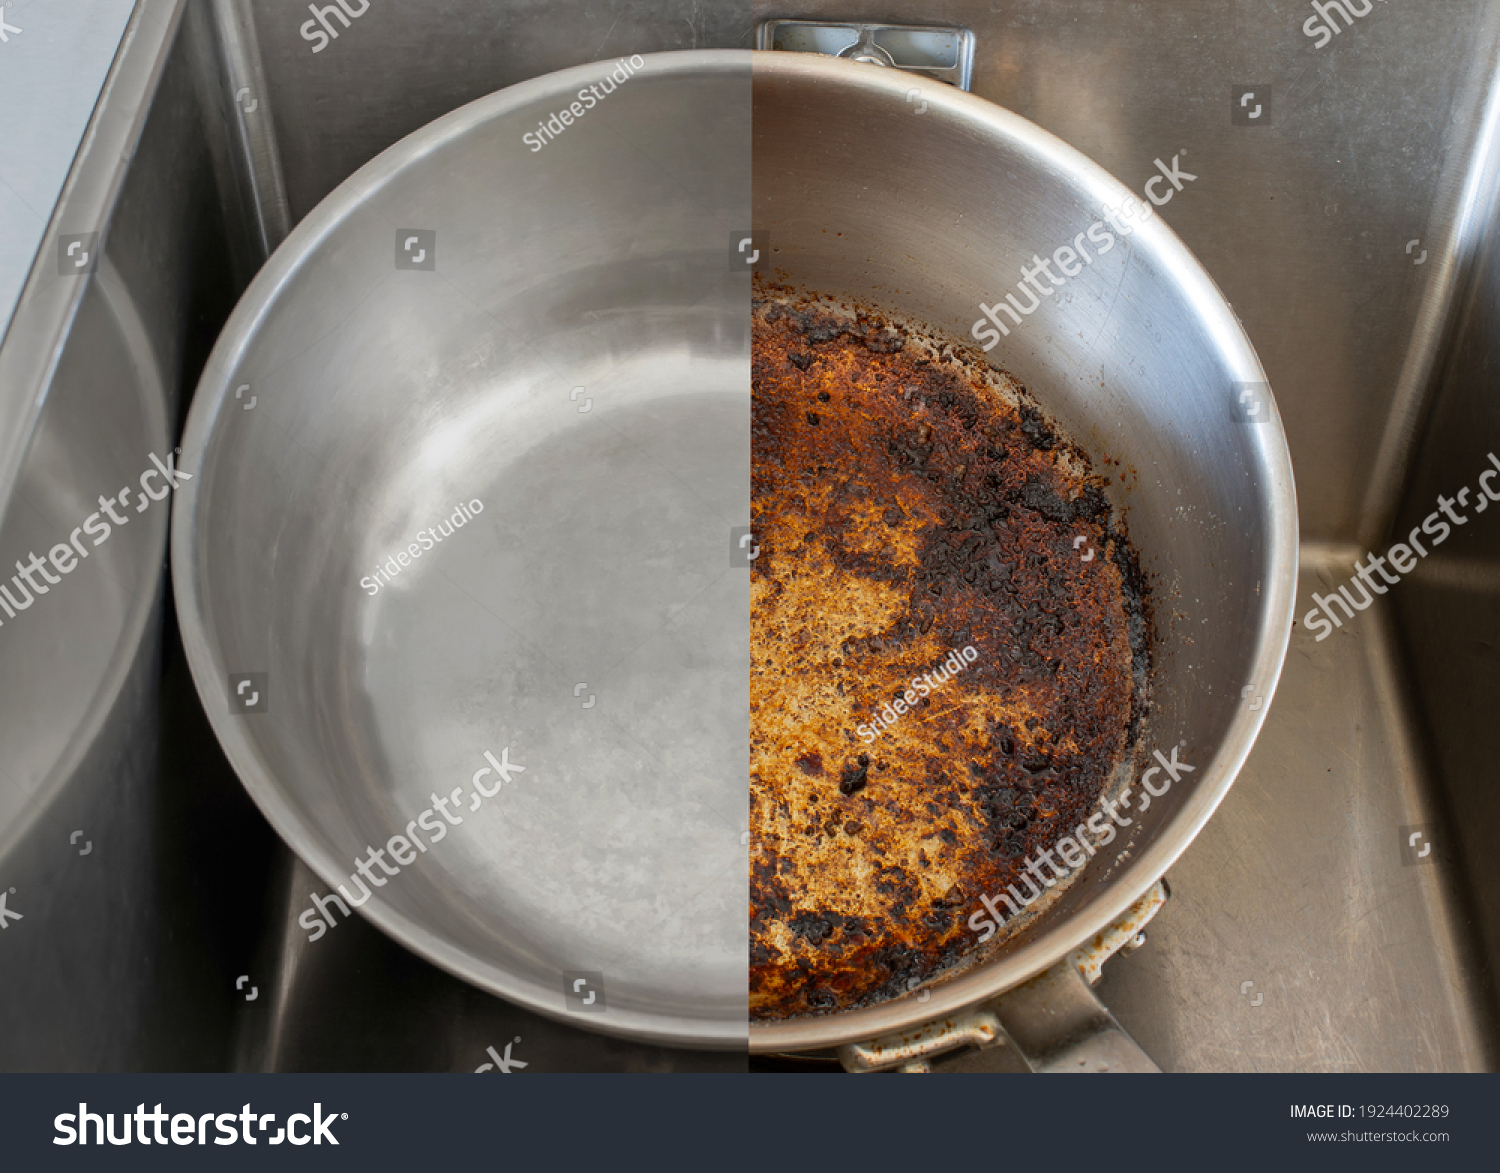 Compare burnt pan image before and after cleaning the unclean able stained pot from burnt cooking pot. The dirty stainless steel pan with the clean pan clean shiny bright like new in the kitchen sink. #1924402289